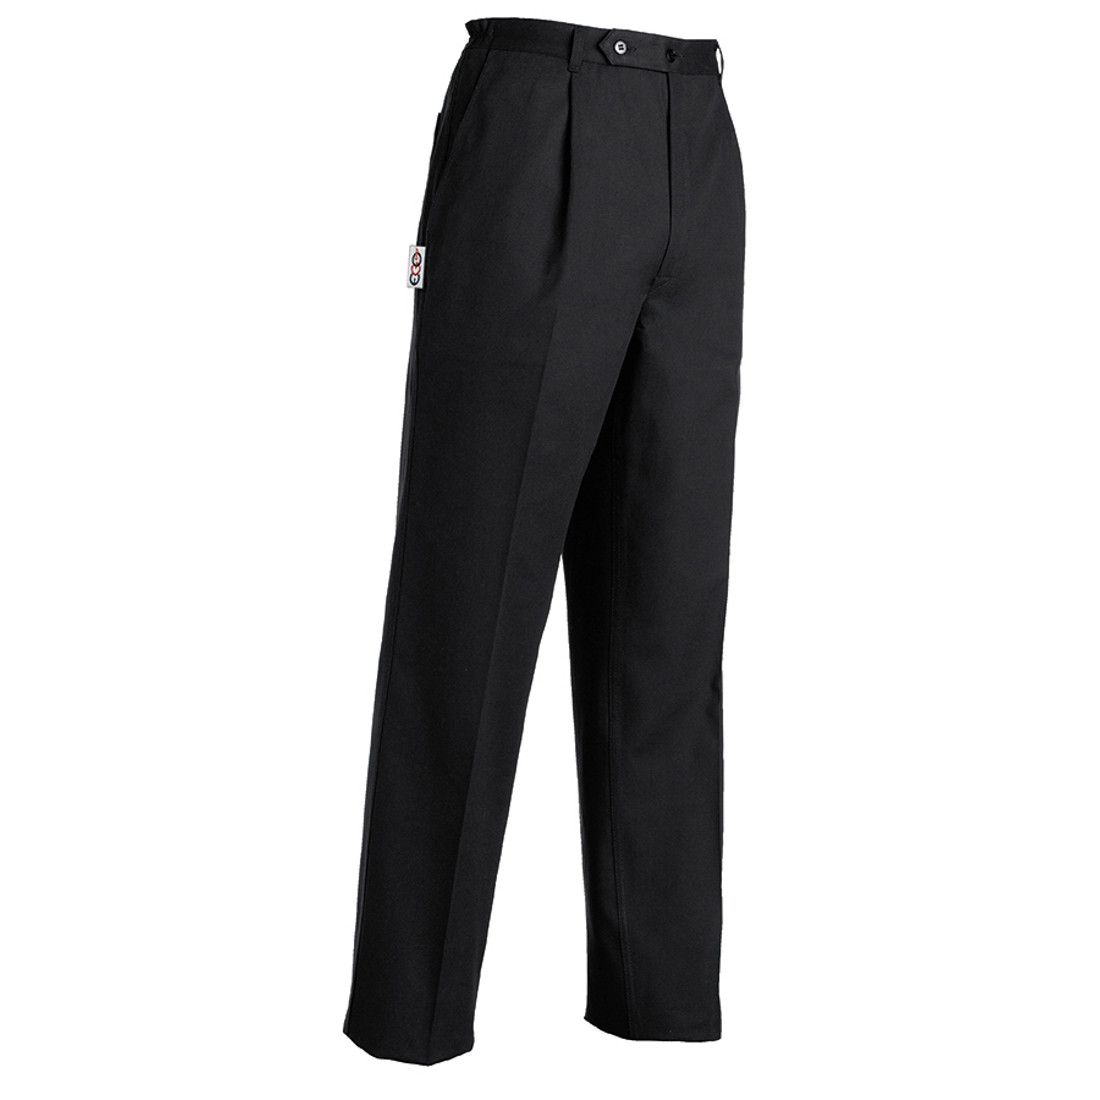 Unisex Trousers, 65% poliester/35% bumbac - Safetywear